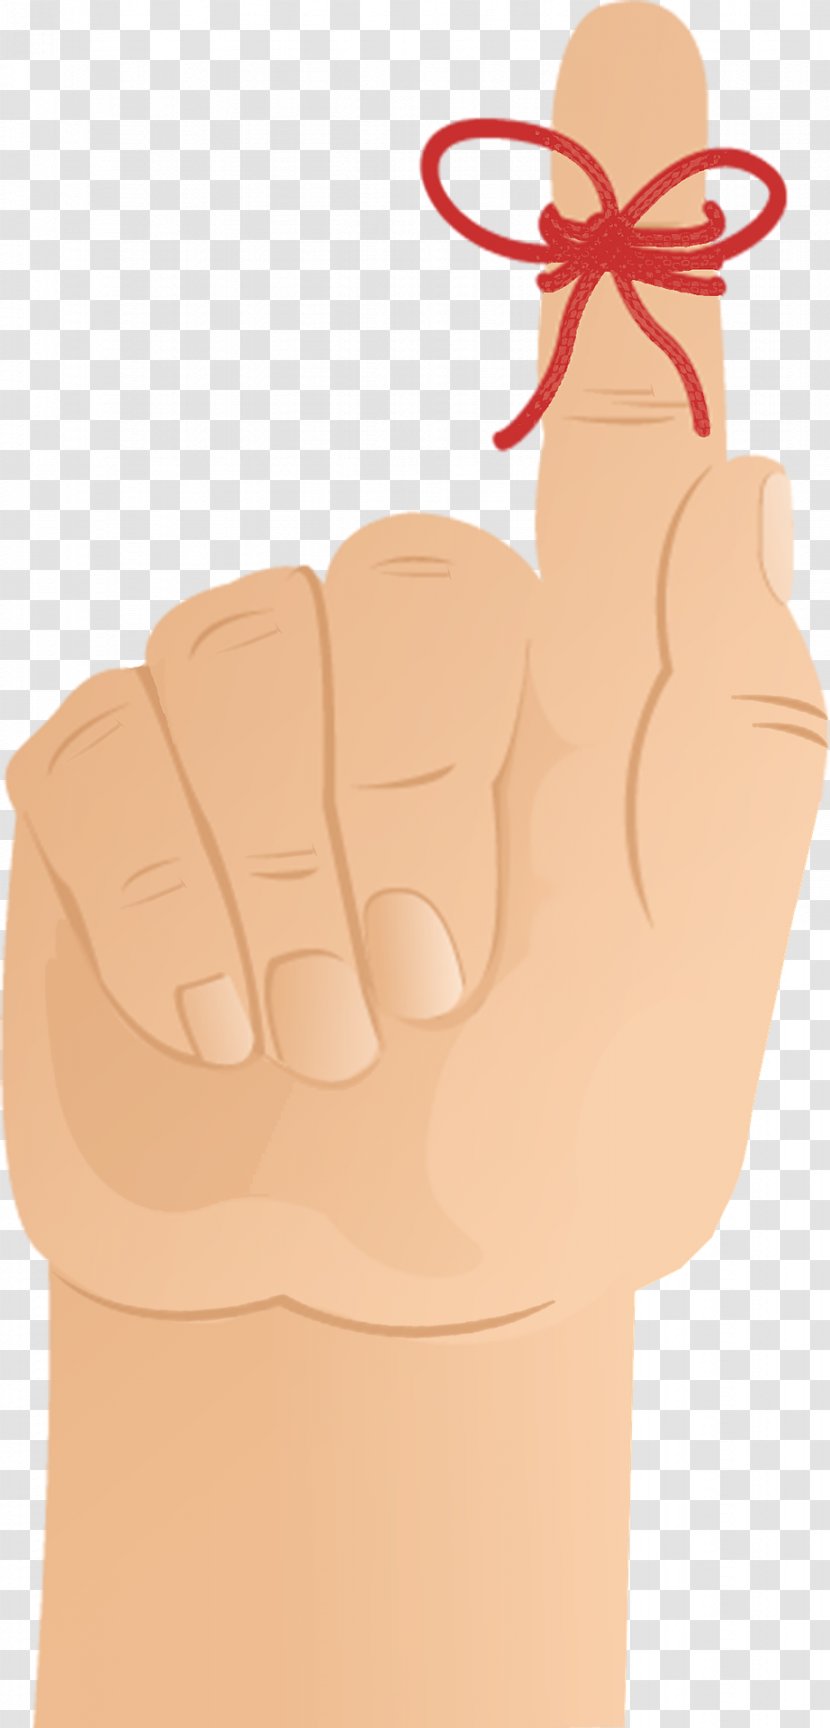 Index Finger Thumb - Photography - Fingers Transparent PNG